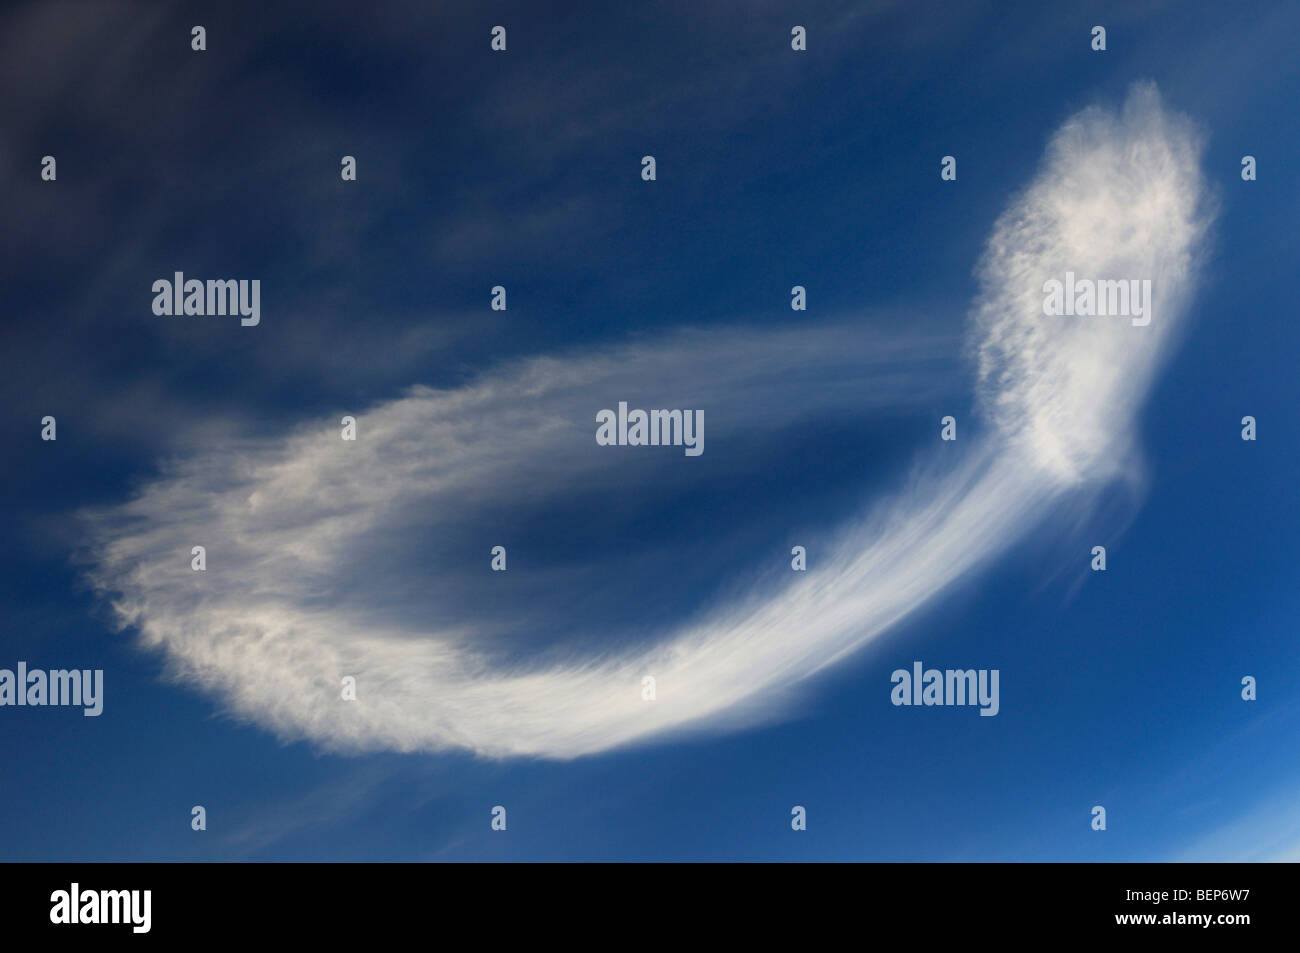 Unusual sweep of a cloud formation on blue sky resembling a sperm Stock Photo